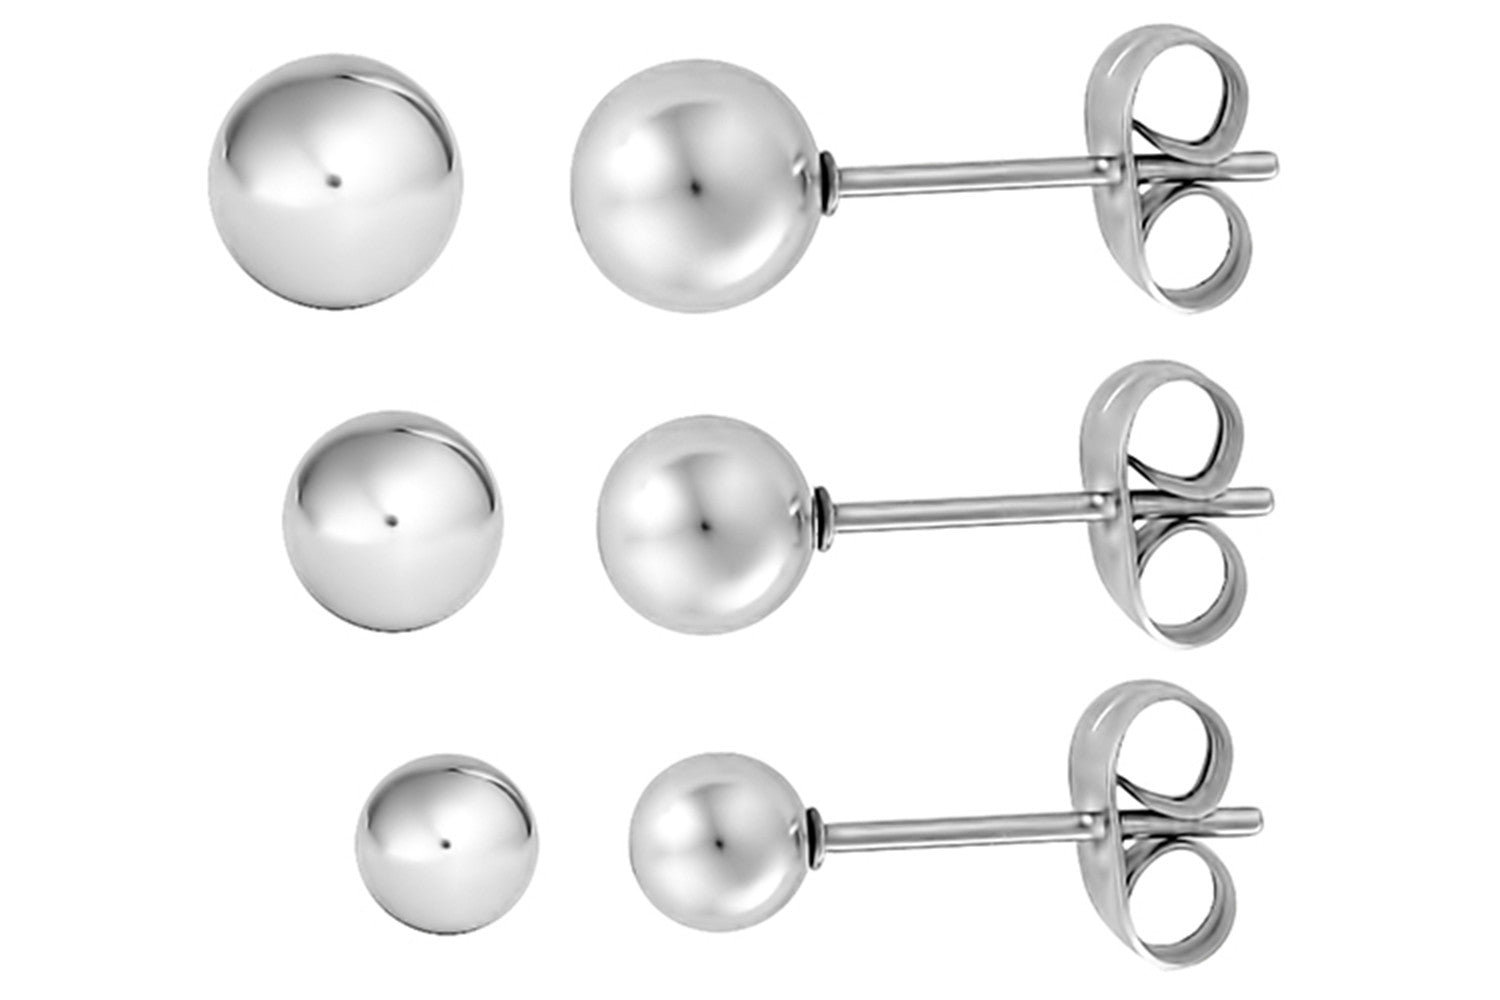 These hypoallergenic earrings are made with surgical grade 316L Stainless Steel and Titanium IP plating for color. These earrings are nickel free and safe for sensitive ears.